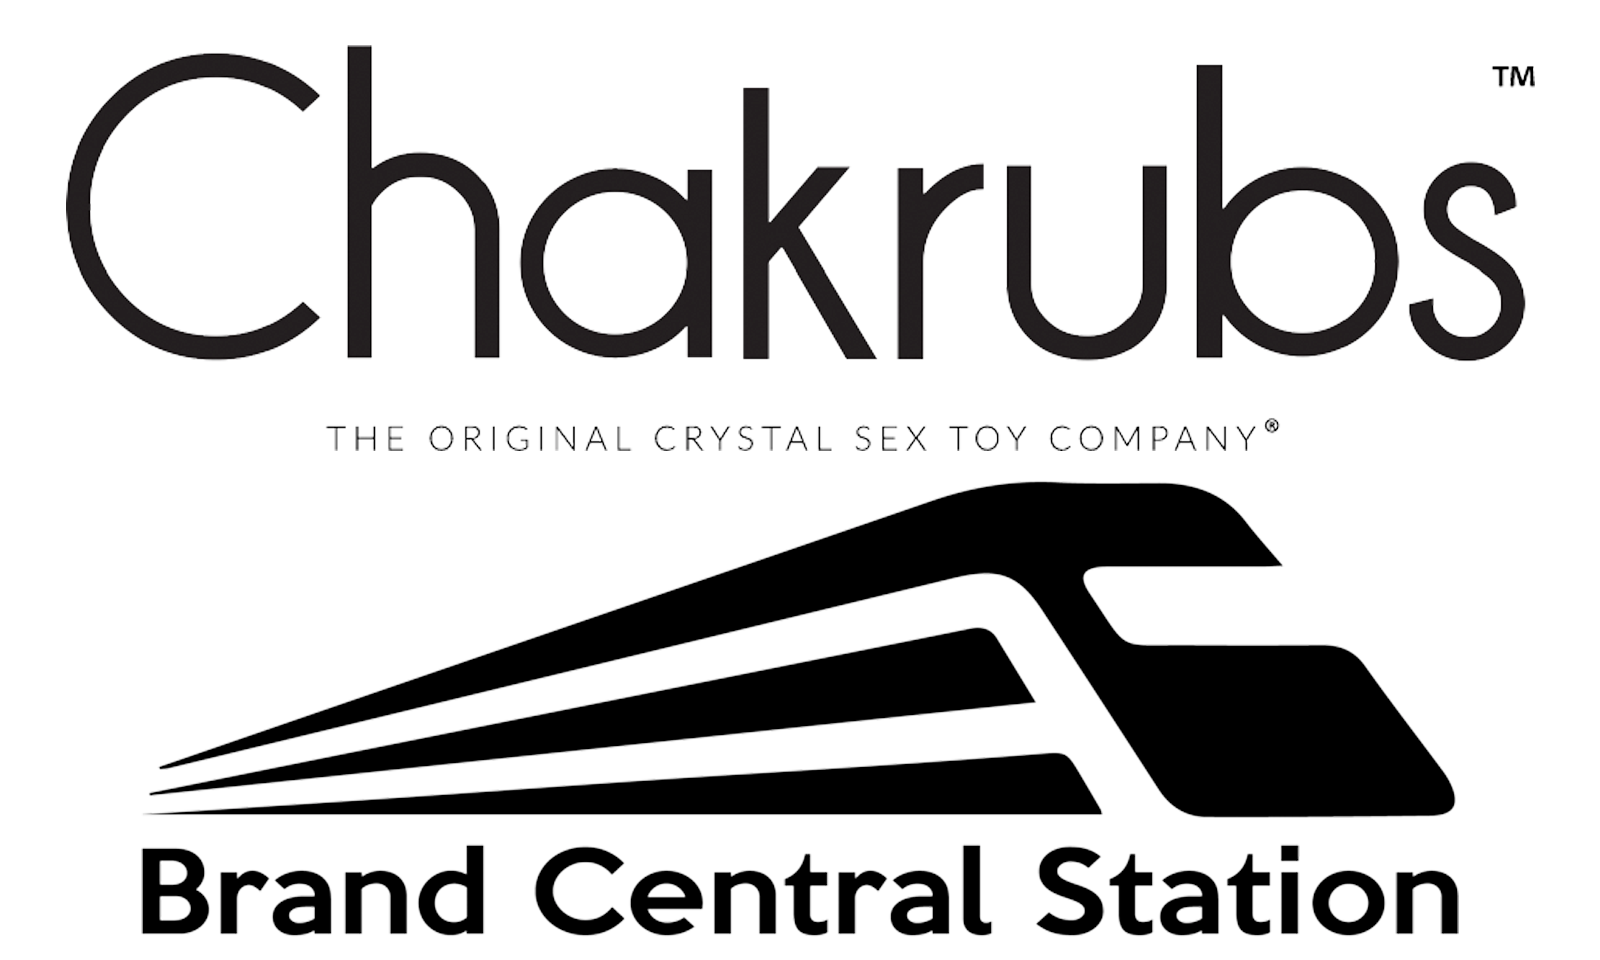 Brand Central Station Partners with Chakrubs Crystal Pleasure Toy